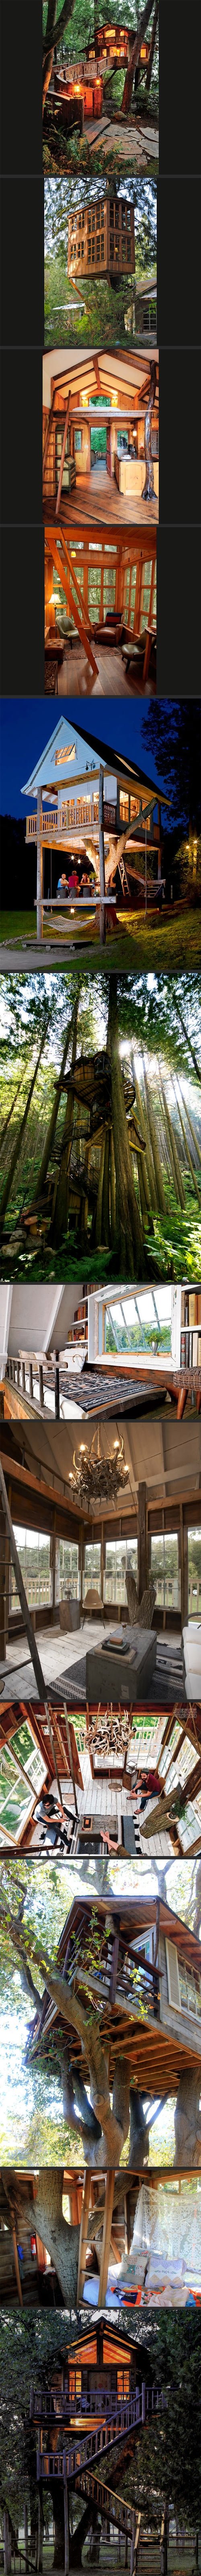 Tree house hotel rooms.